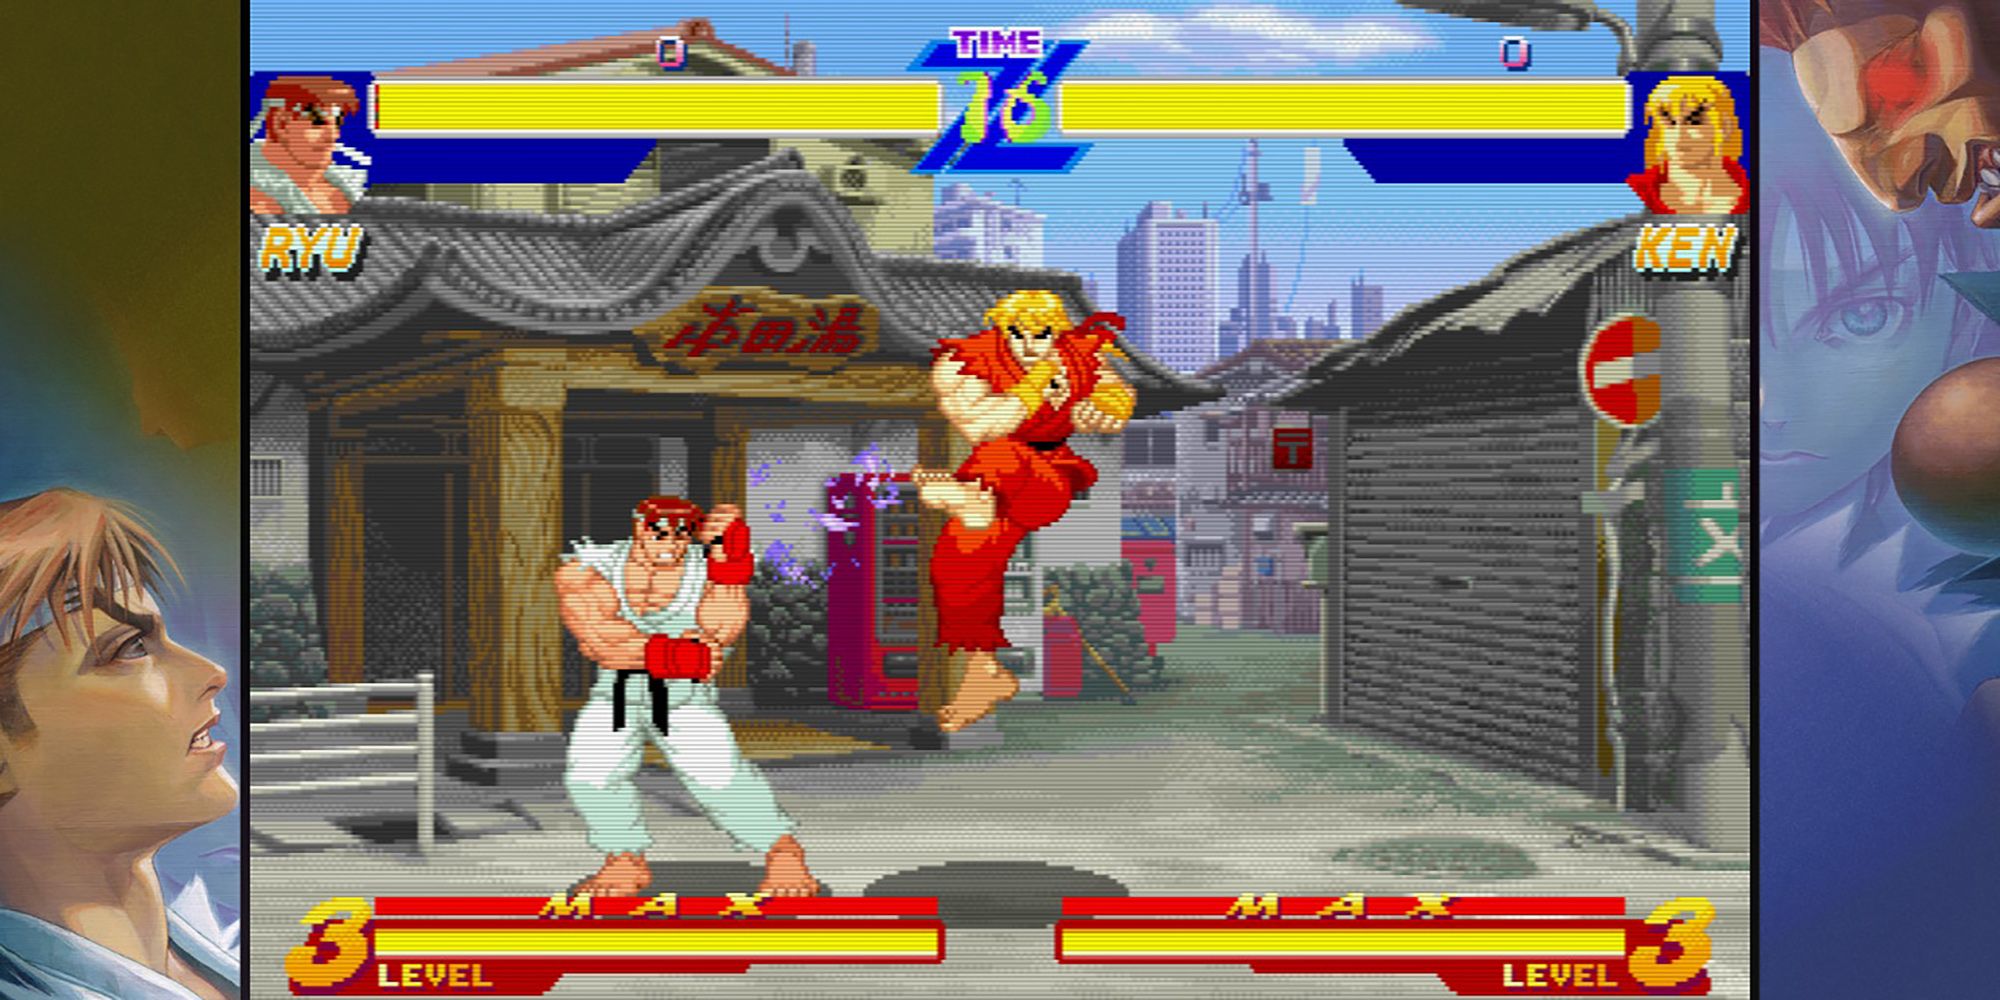 Ken kicks Ryu in the face with his Tatsumaki-Senpkyaku during a match on a city street in Street Fighter Alpha.